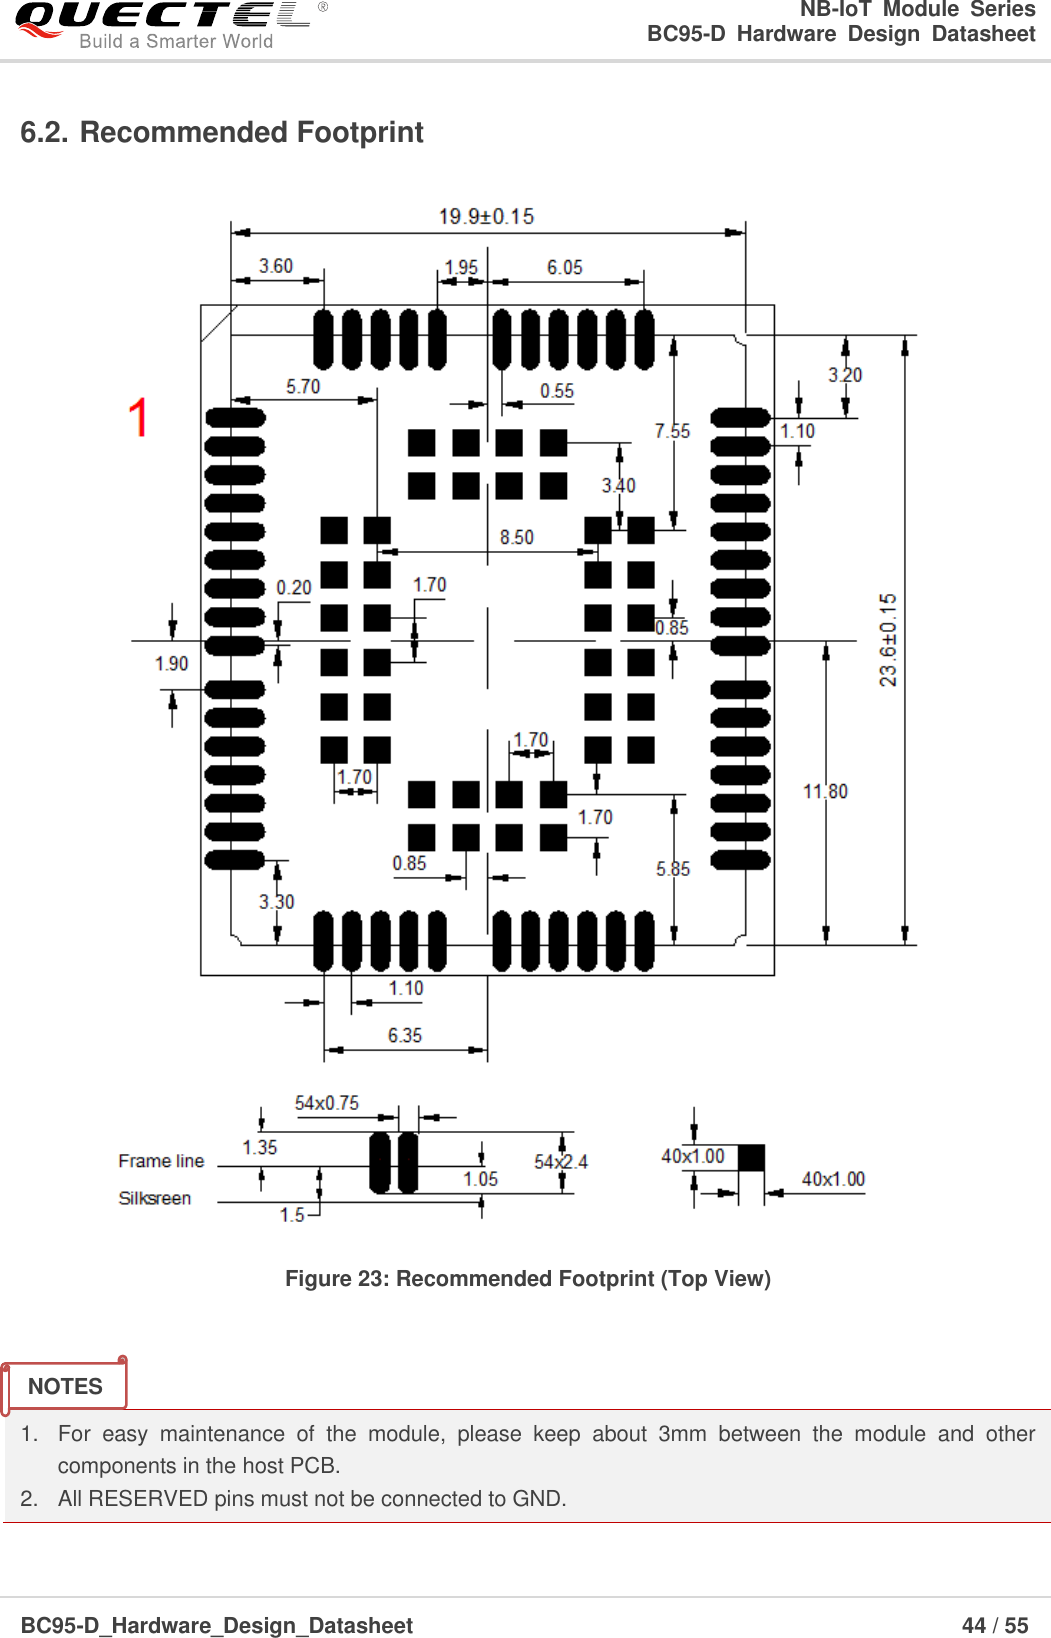                                                            NB-IoT  Module  Series                                                          BC95-D  Hardware  Design  Datasheet BC95-D_Hardware_Design_Datasheet                                                                    44 / 55    6.2. Recommended Footprint  Figure 23: Recommended Footprint (Top View)   1.  For  easy  maintenance  of  the  module,  please  keep  about  3mm  between  the  module  and  other components in the host PCB. 2.  All RESERVED pins must not be connected to GND.  NOTES 